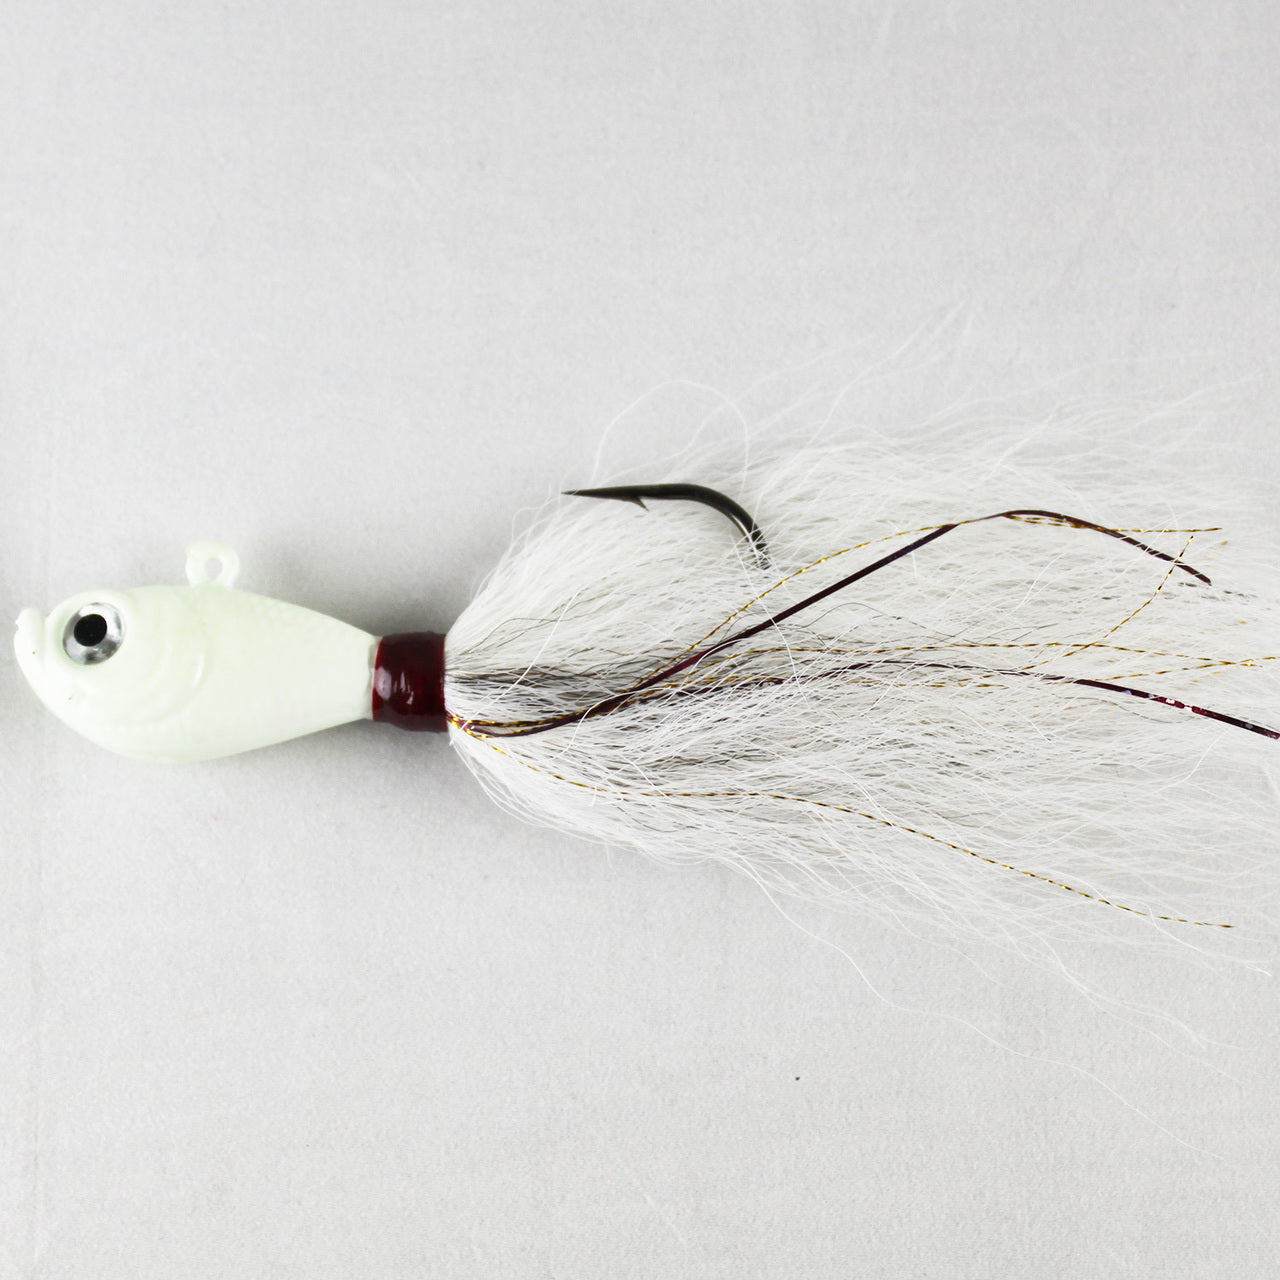 Spro Power Bucktail Jig Crazy Chartreuse / 2 oz